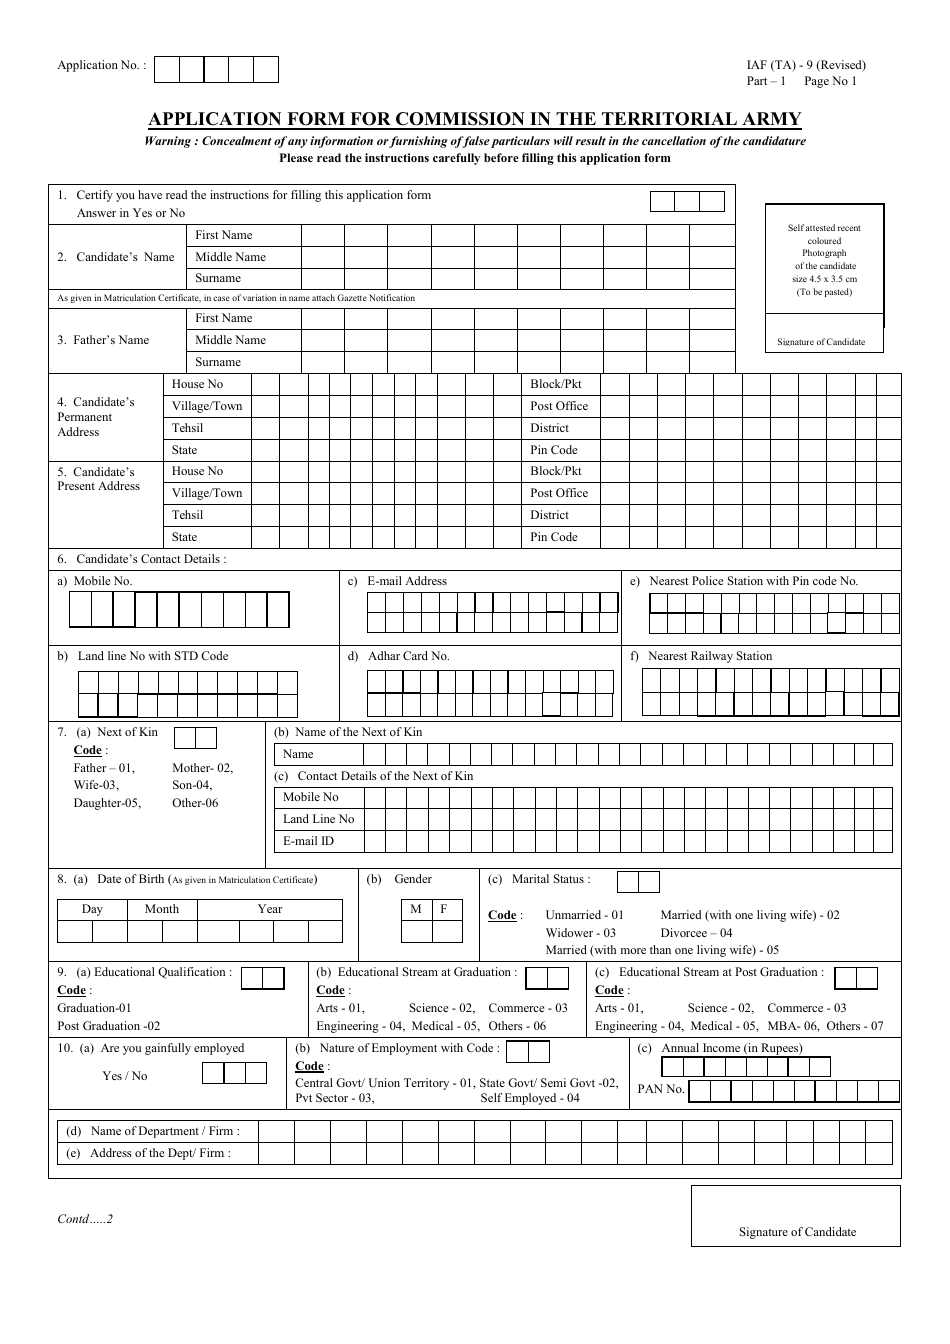 Form IAF (TA) -9 Part 1 Application Form for Commission in the Territorial Army - India, Page 1